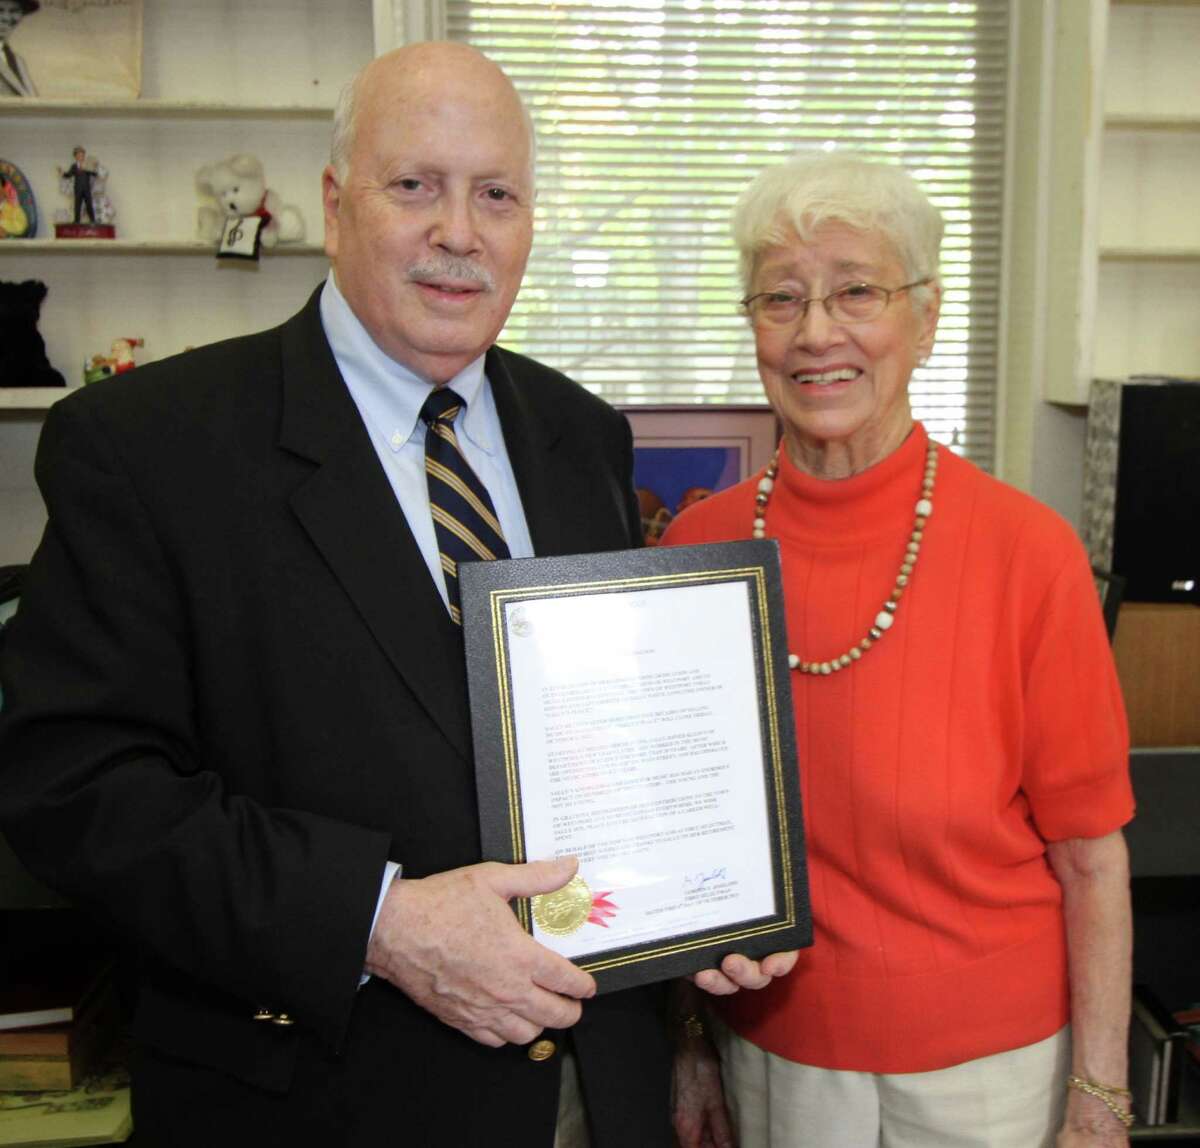 First Selectman Gordon Joseloff displays a commendation from the town to Sally White, before presenting it to her at town hall on Thursday, Oct. 4. White provided music to several generations of Westporters over a half century before closing her Sally's Place record shop this summer.